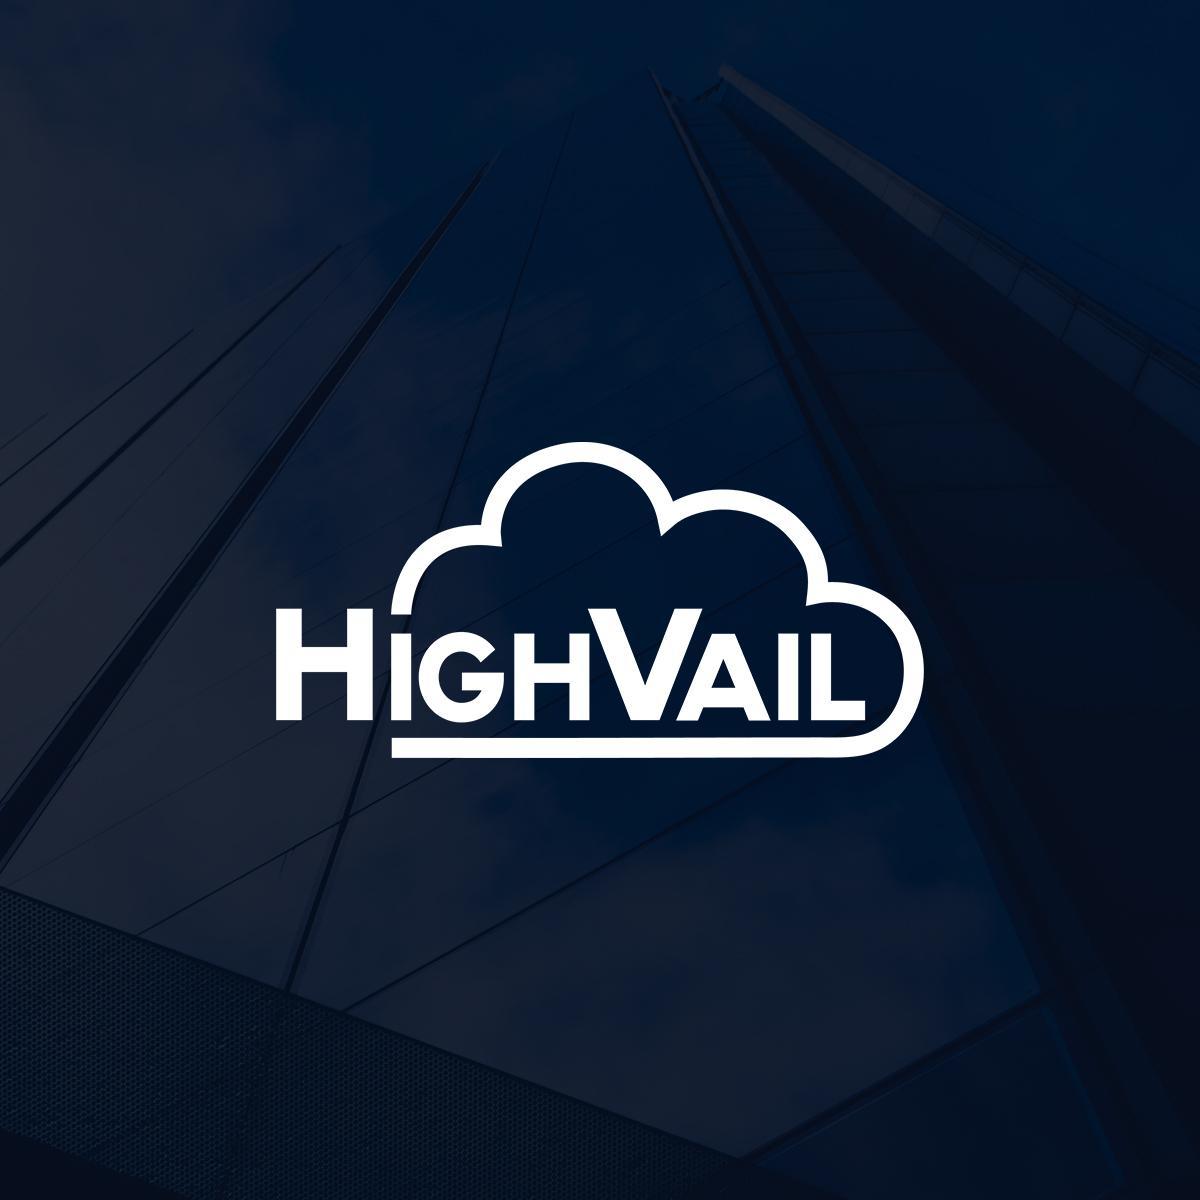 Product: HighVail - We Support & Enable Organizations to Drive IT Innovation